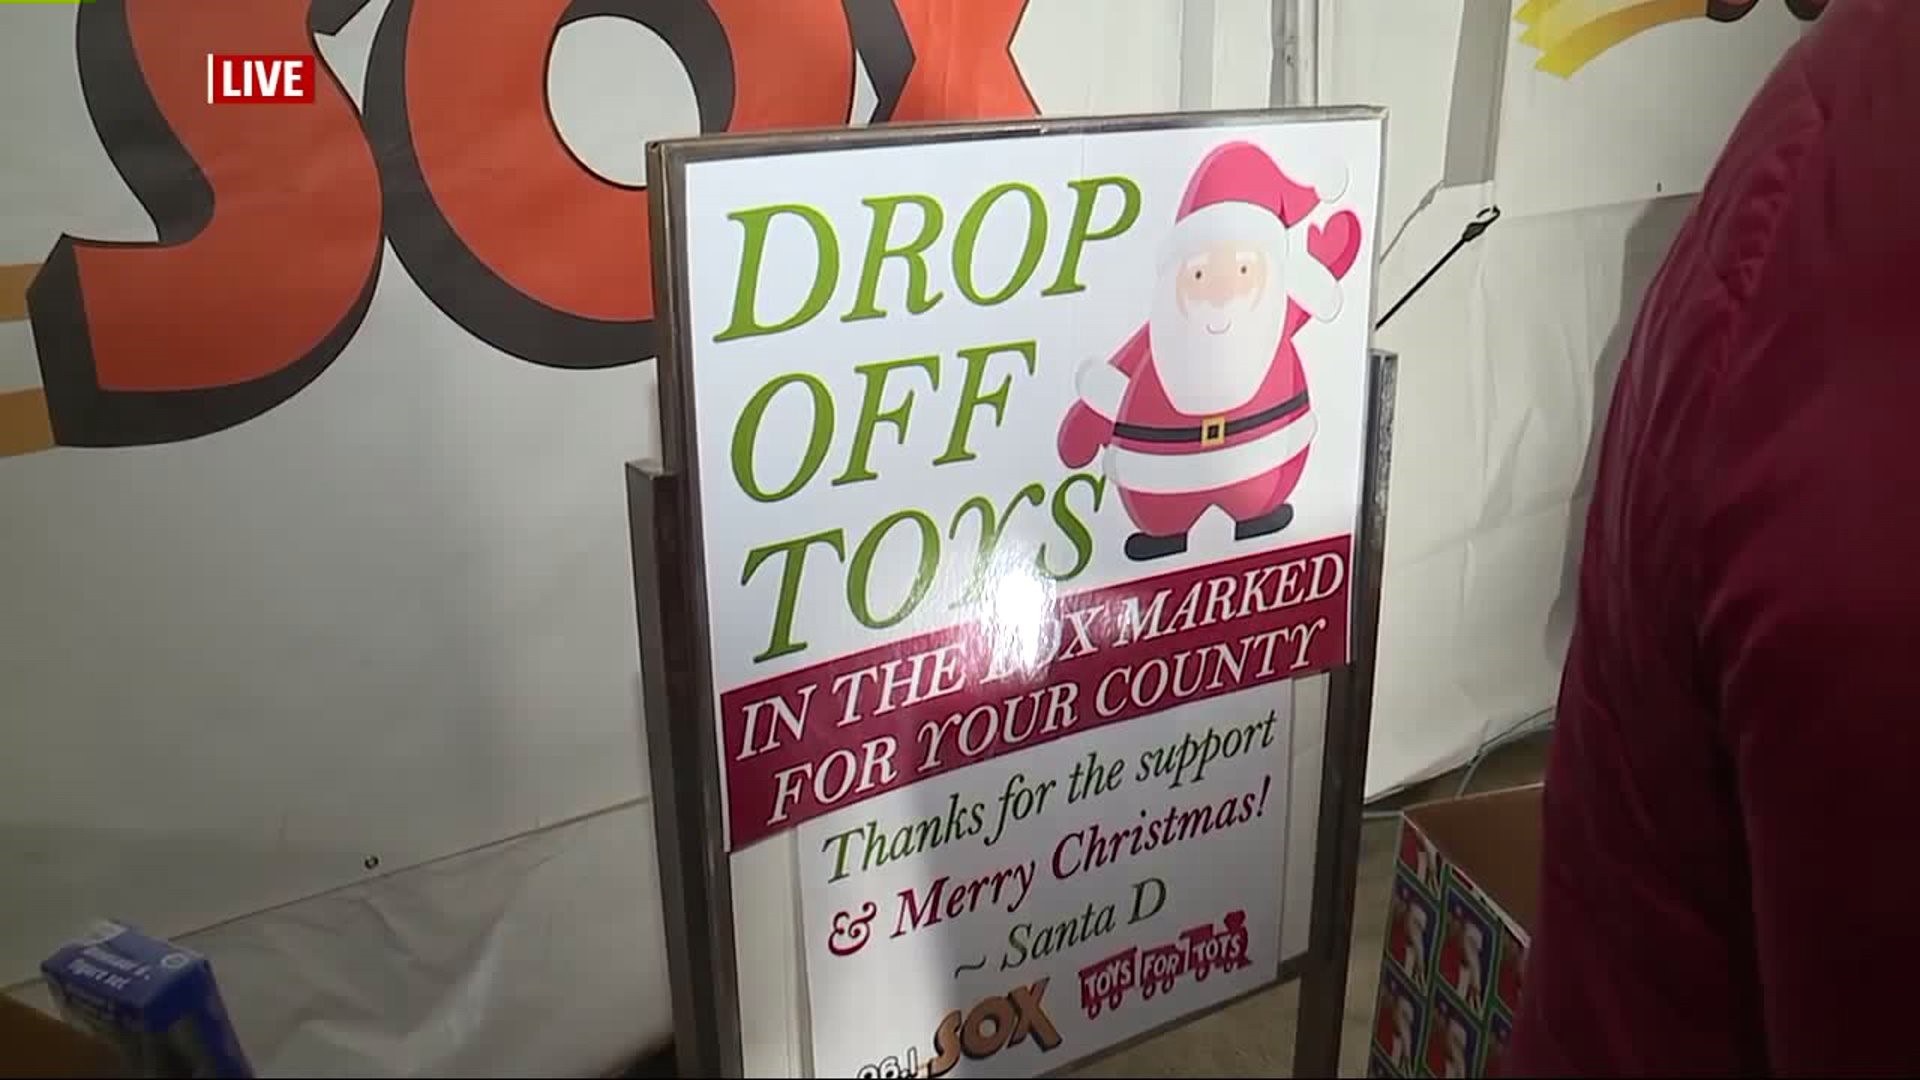 96.1 SOX hosting toy drive